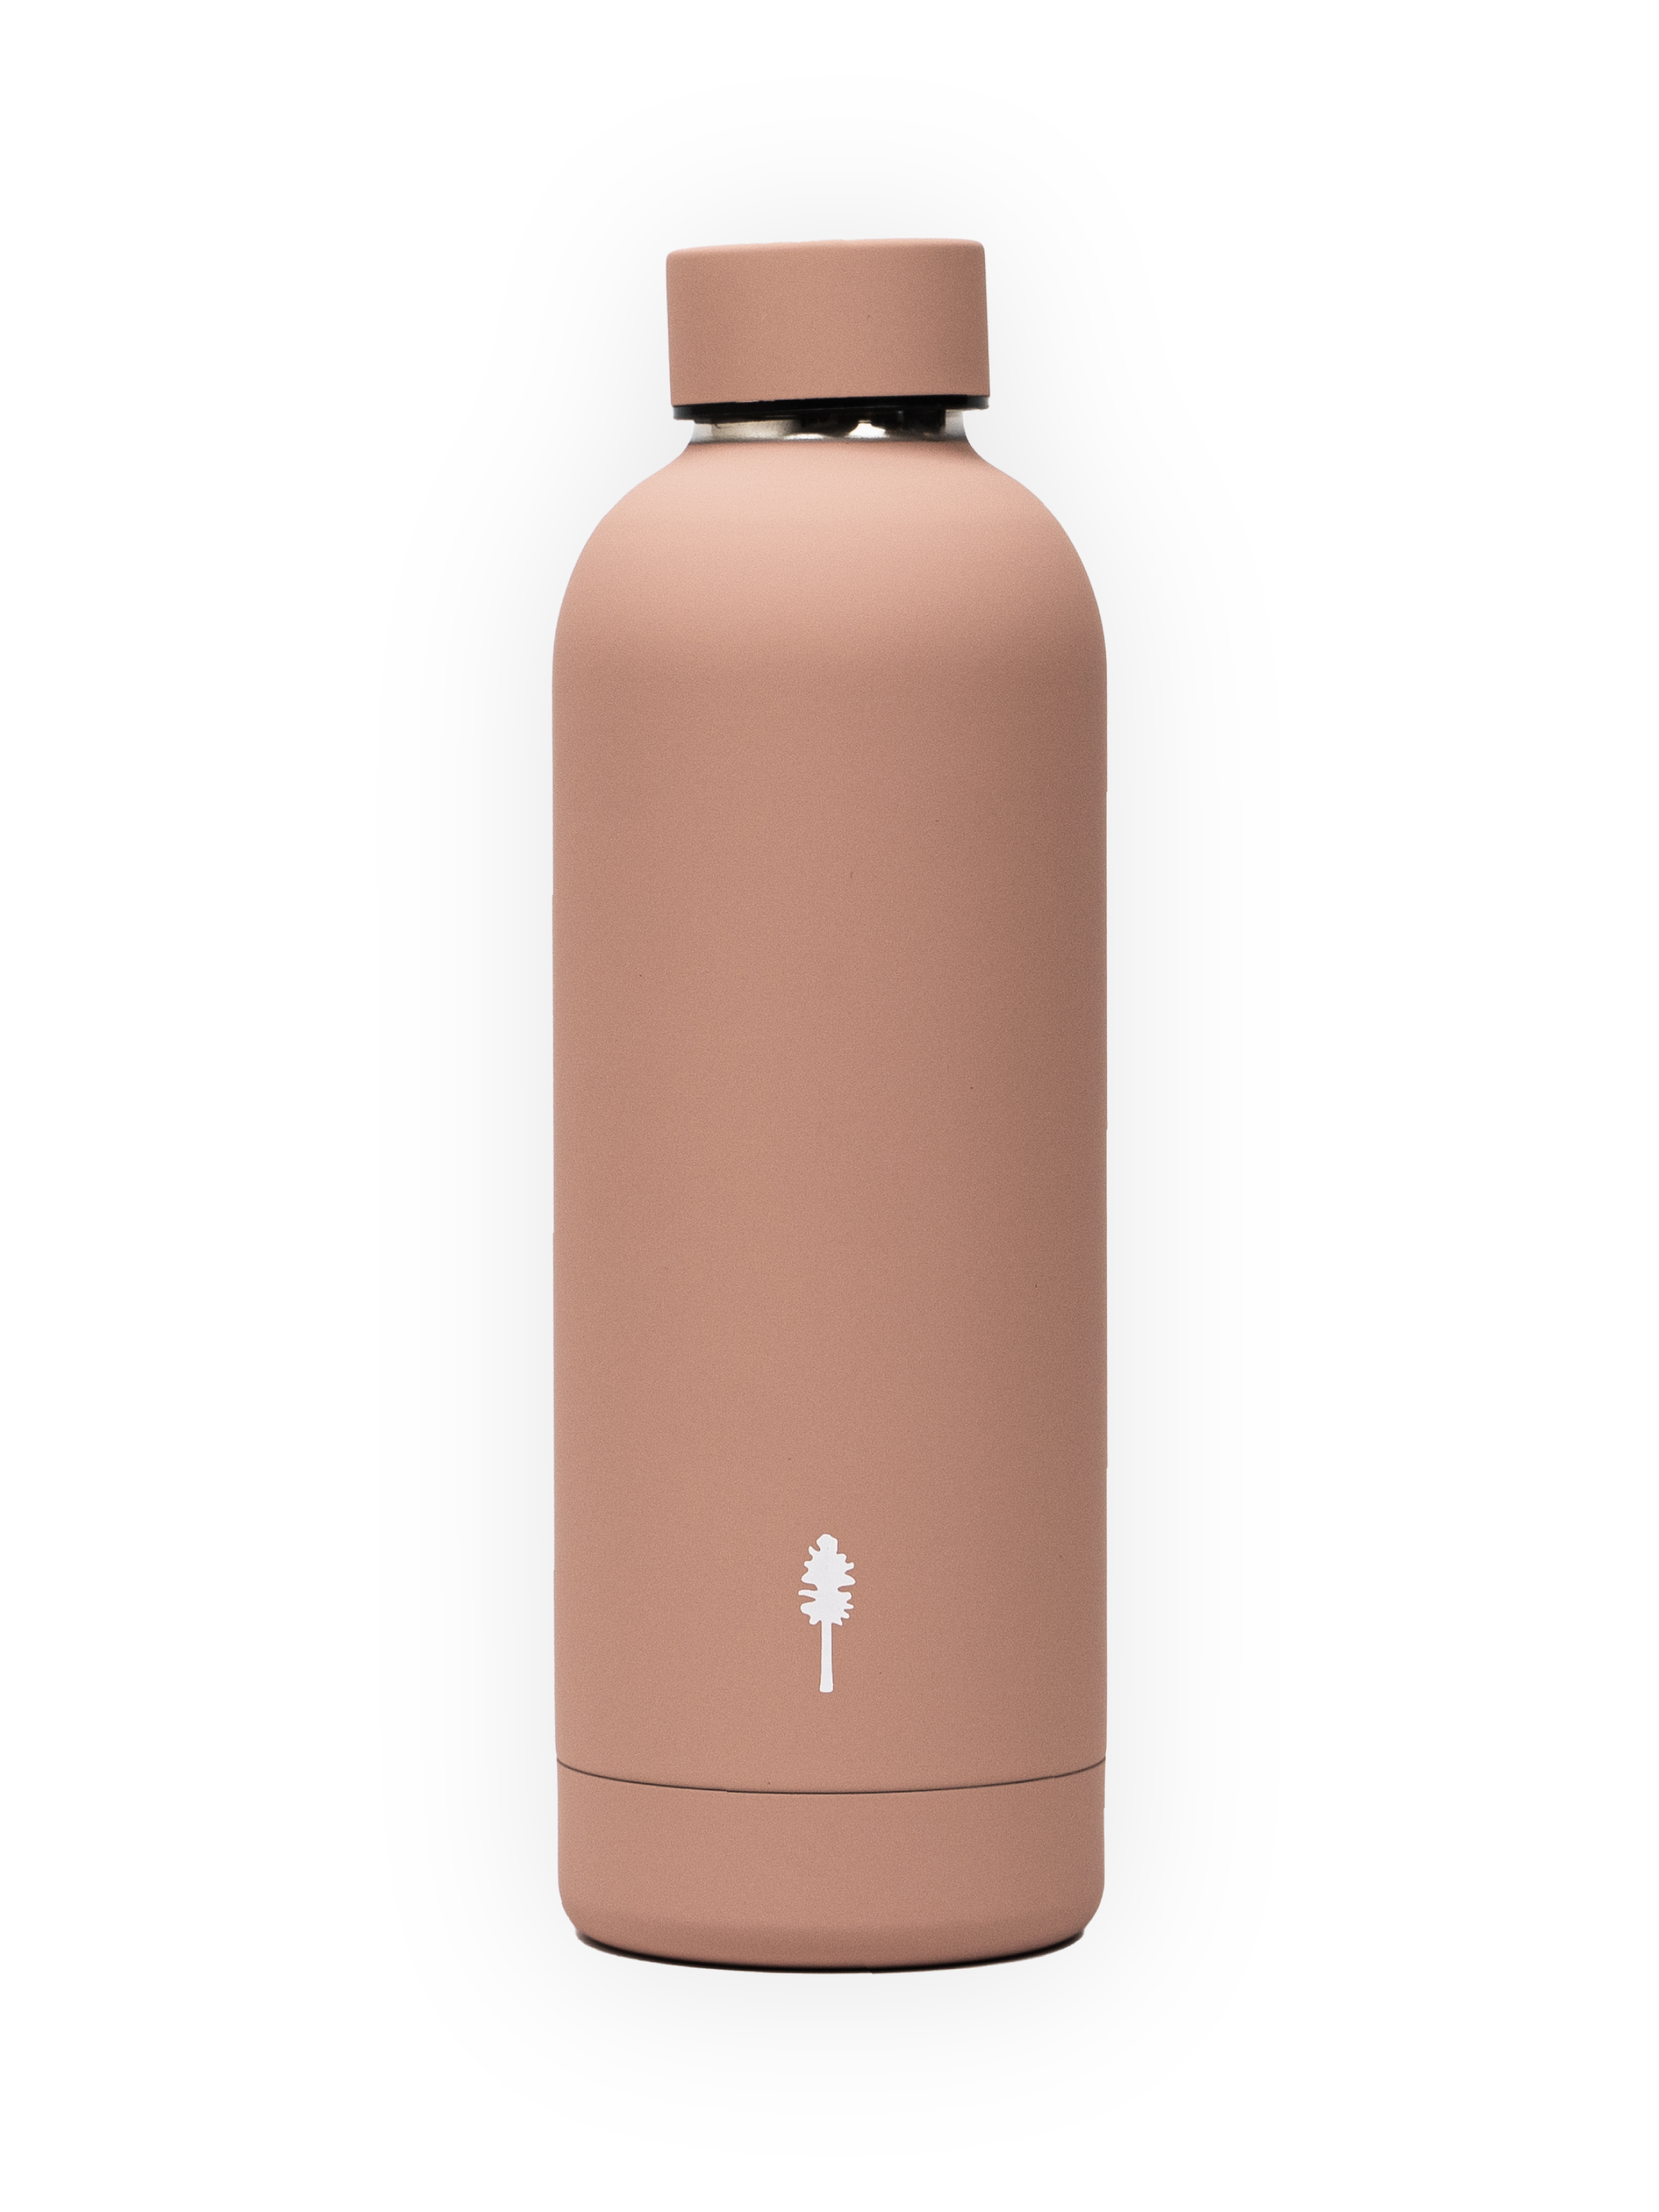 The Bottle - Nude Pink